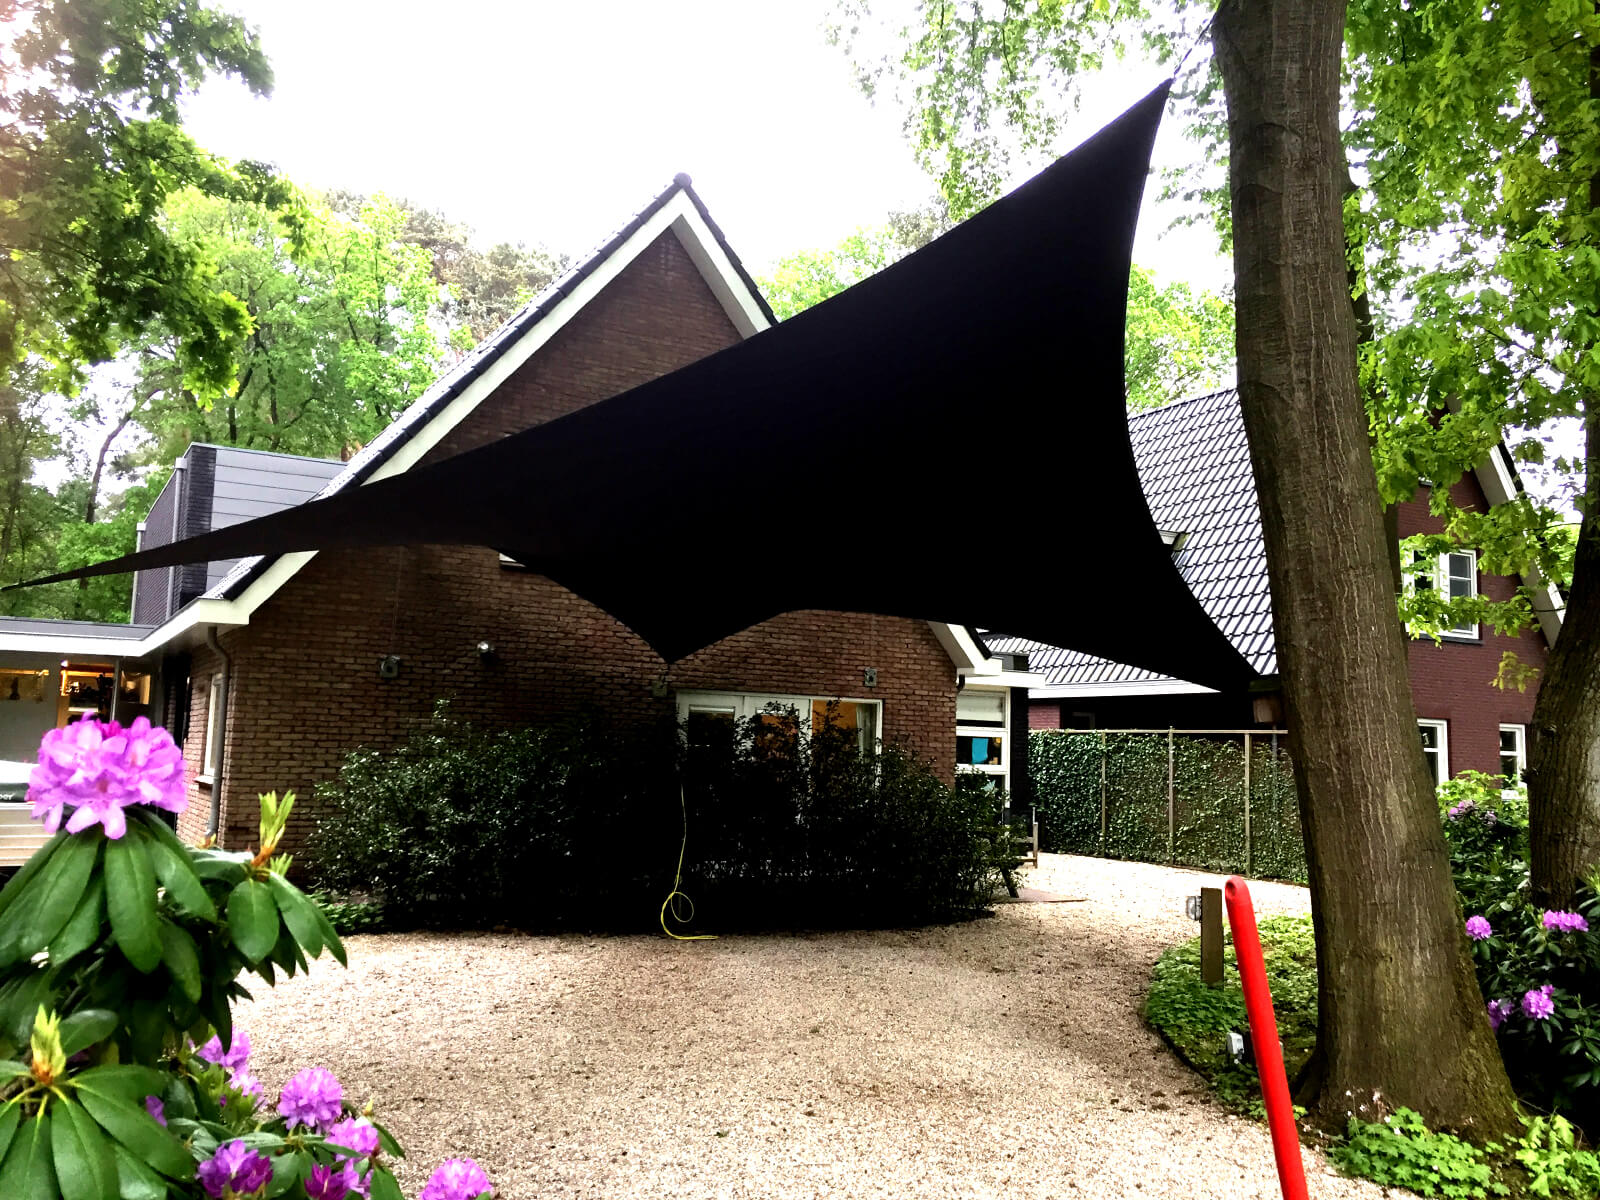 Revolutionize outdoor experience with the most functional and stylish roof available